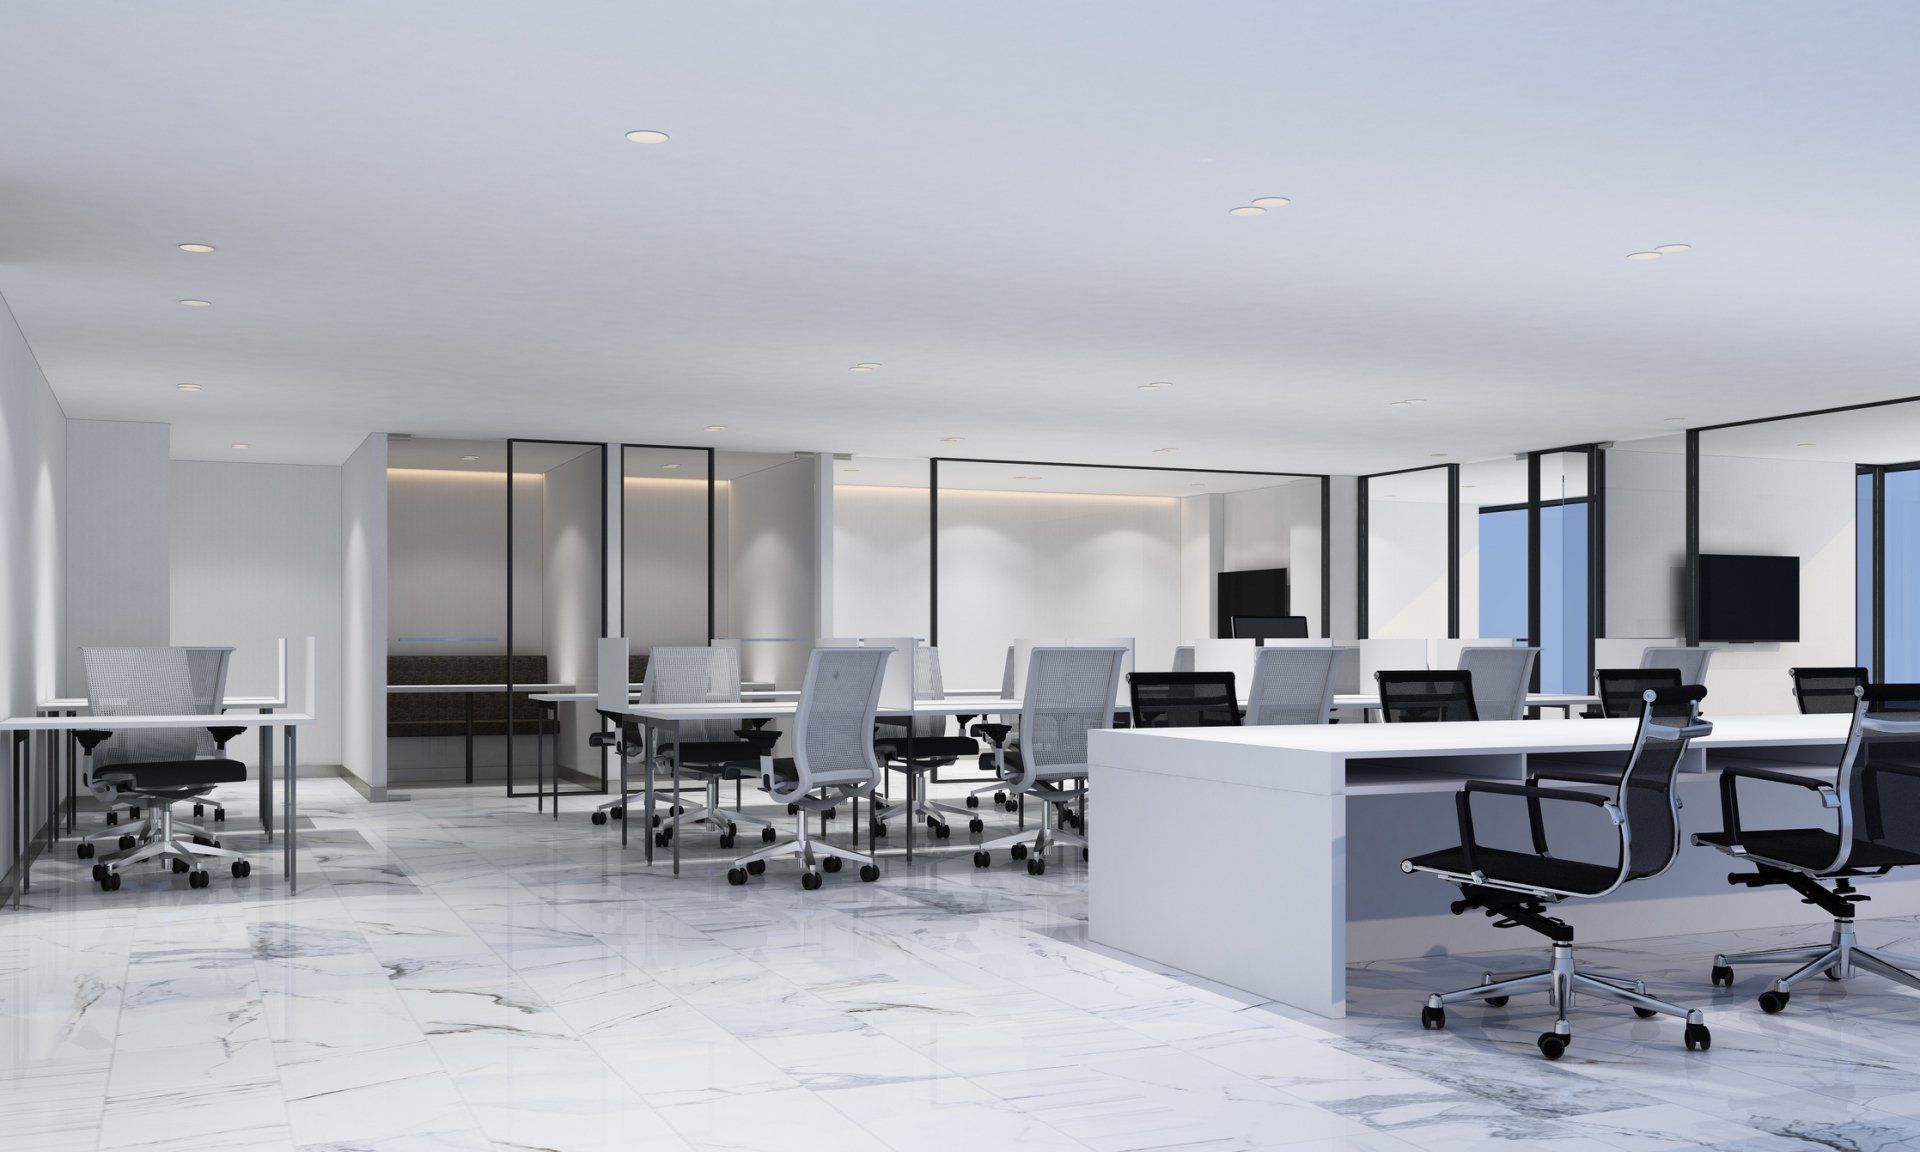 Professional cleaning services ensure a fresh and organized office